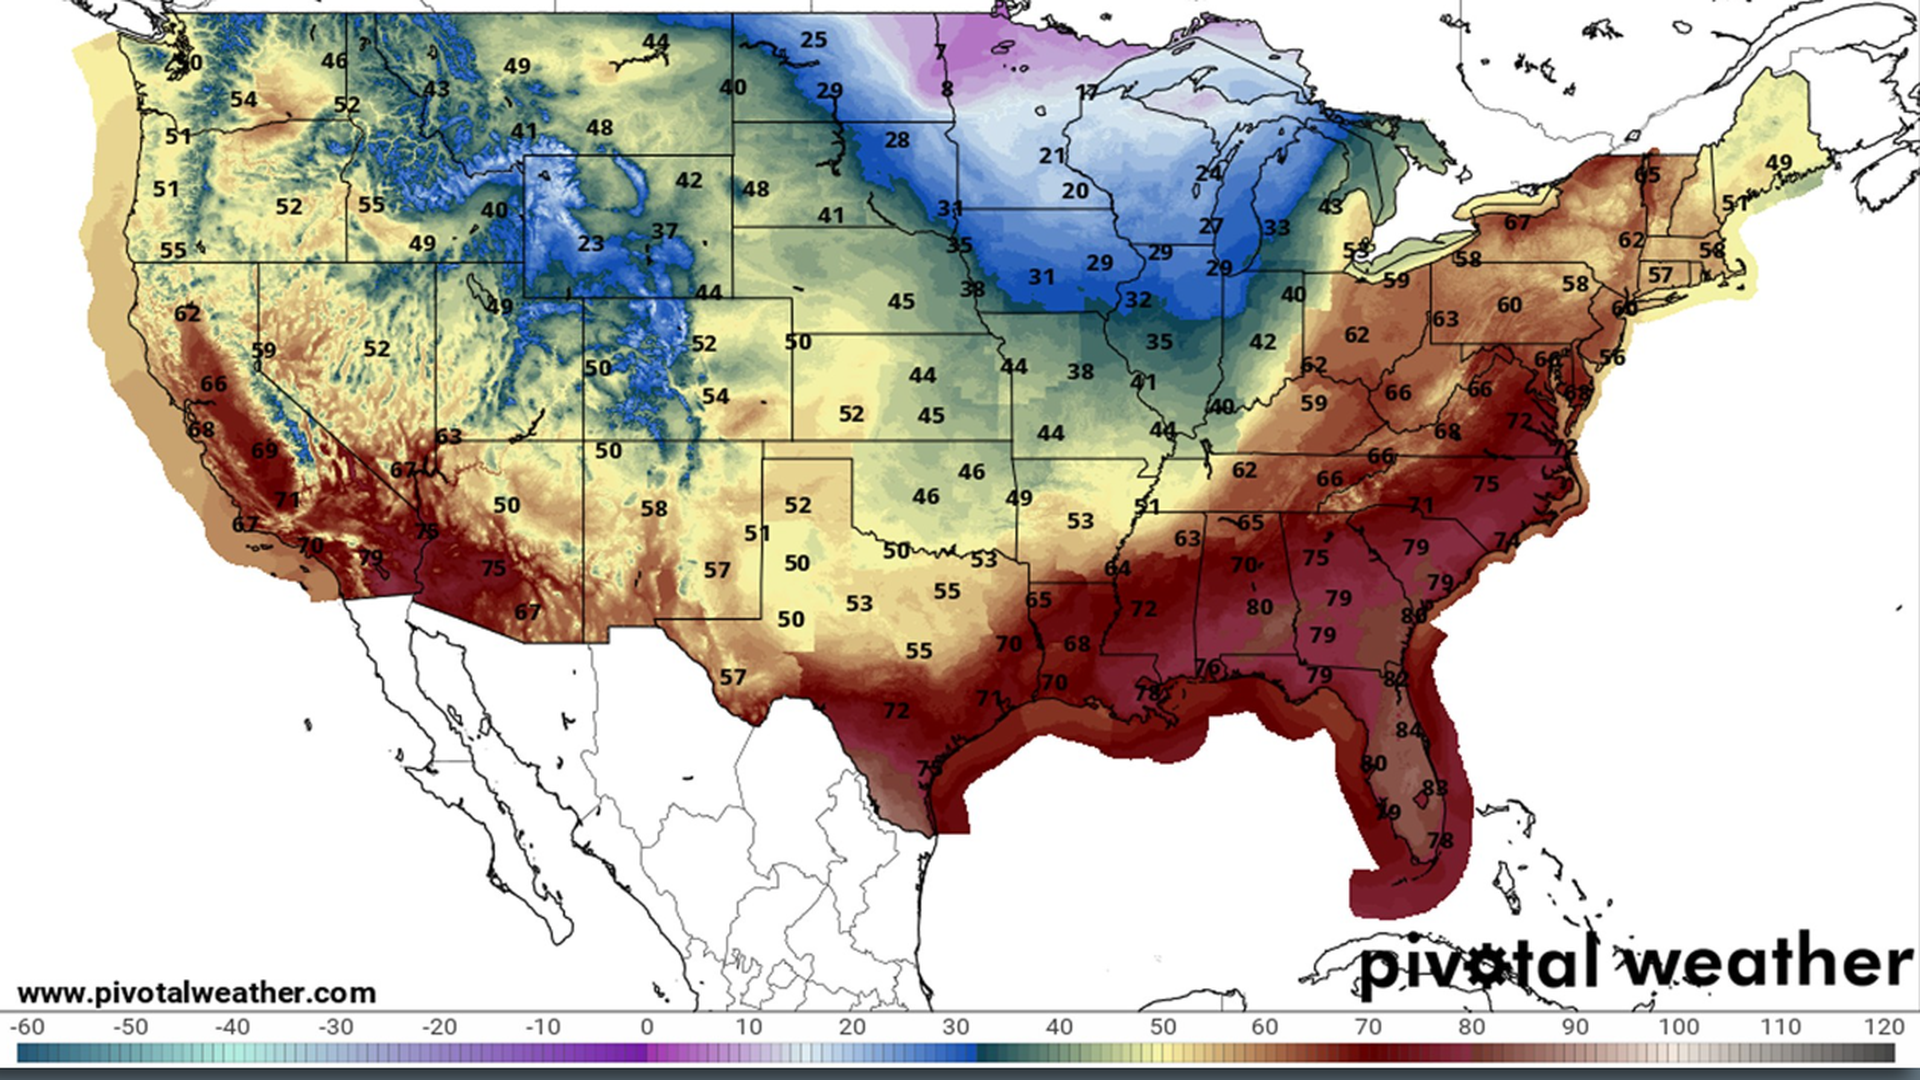 An NWS weather map of forecast temperatures in the U.S. showing near-record highs in the southeast U.S. and wintry lows in the Midwest.